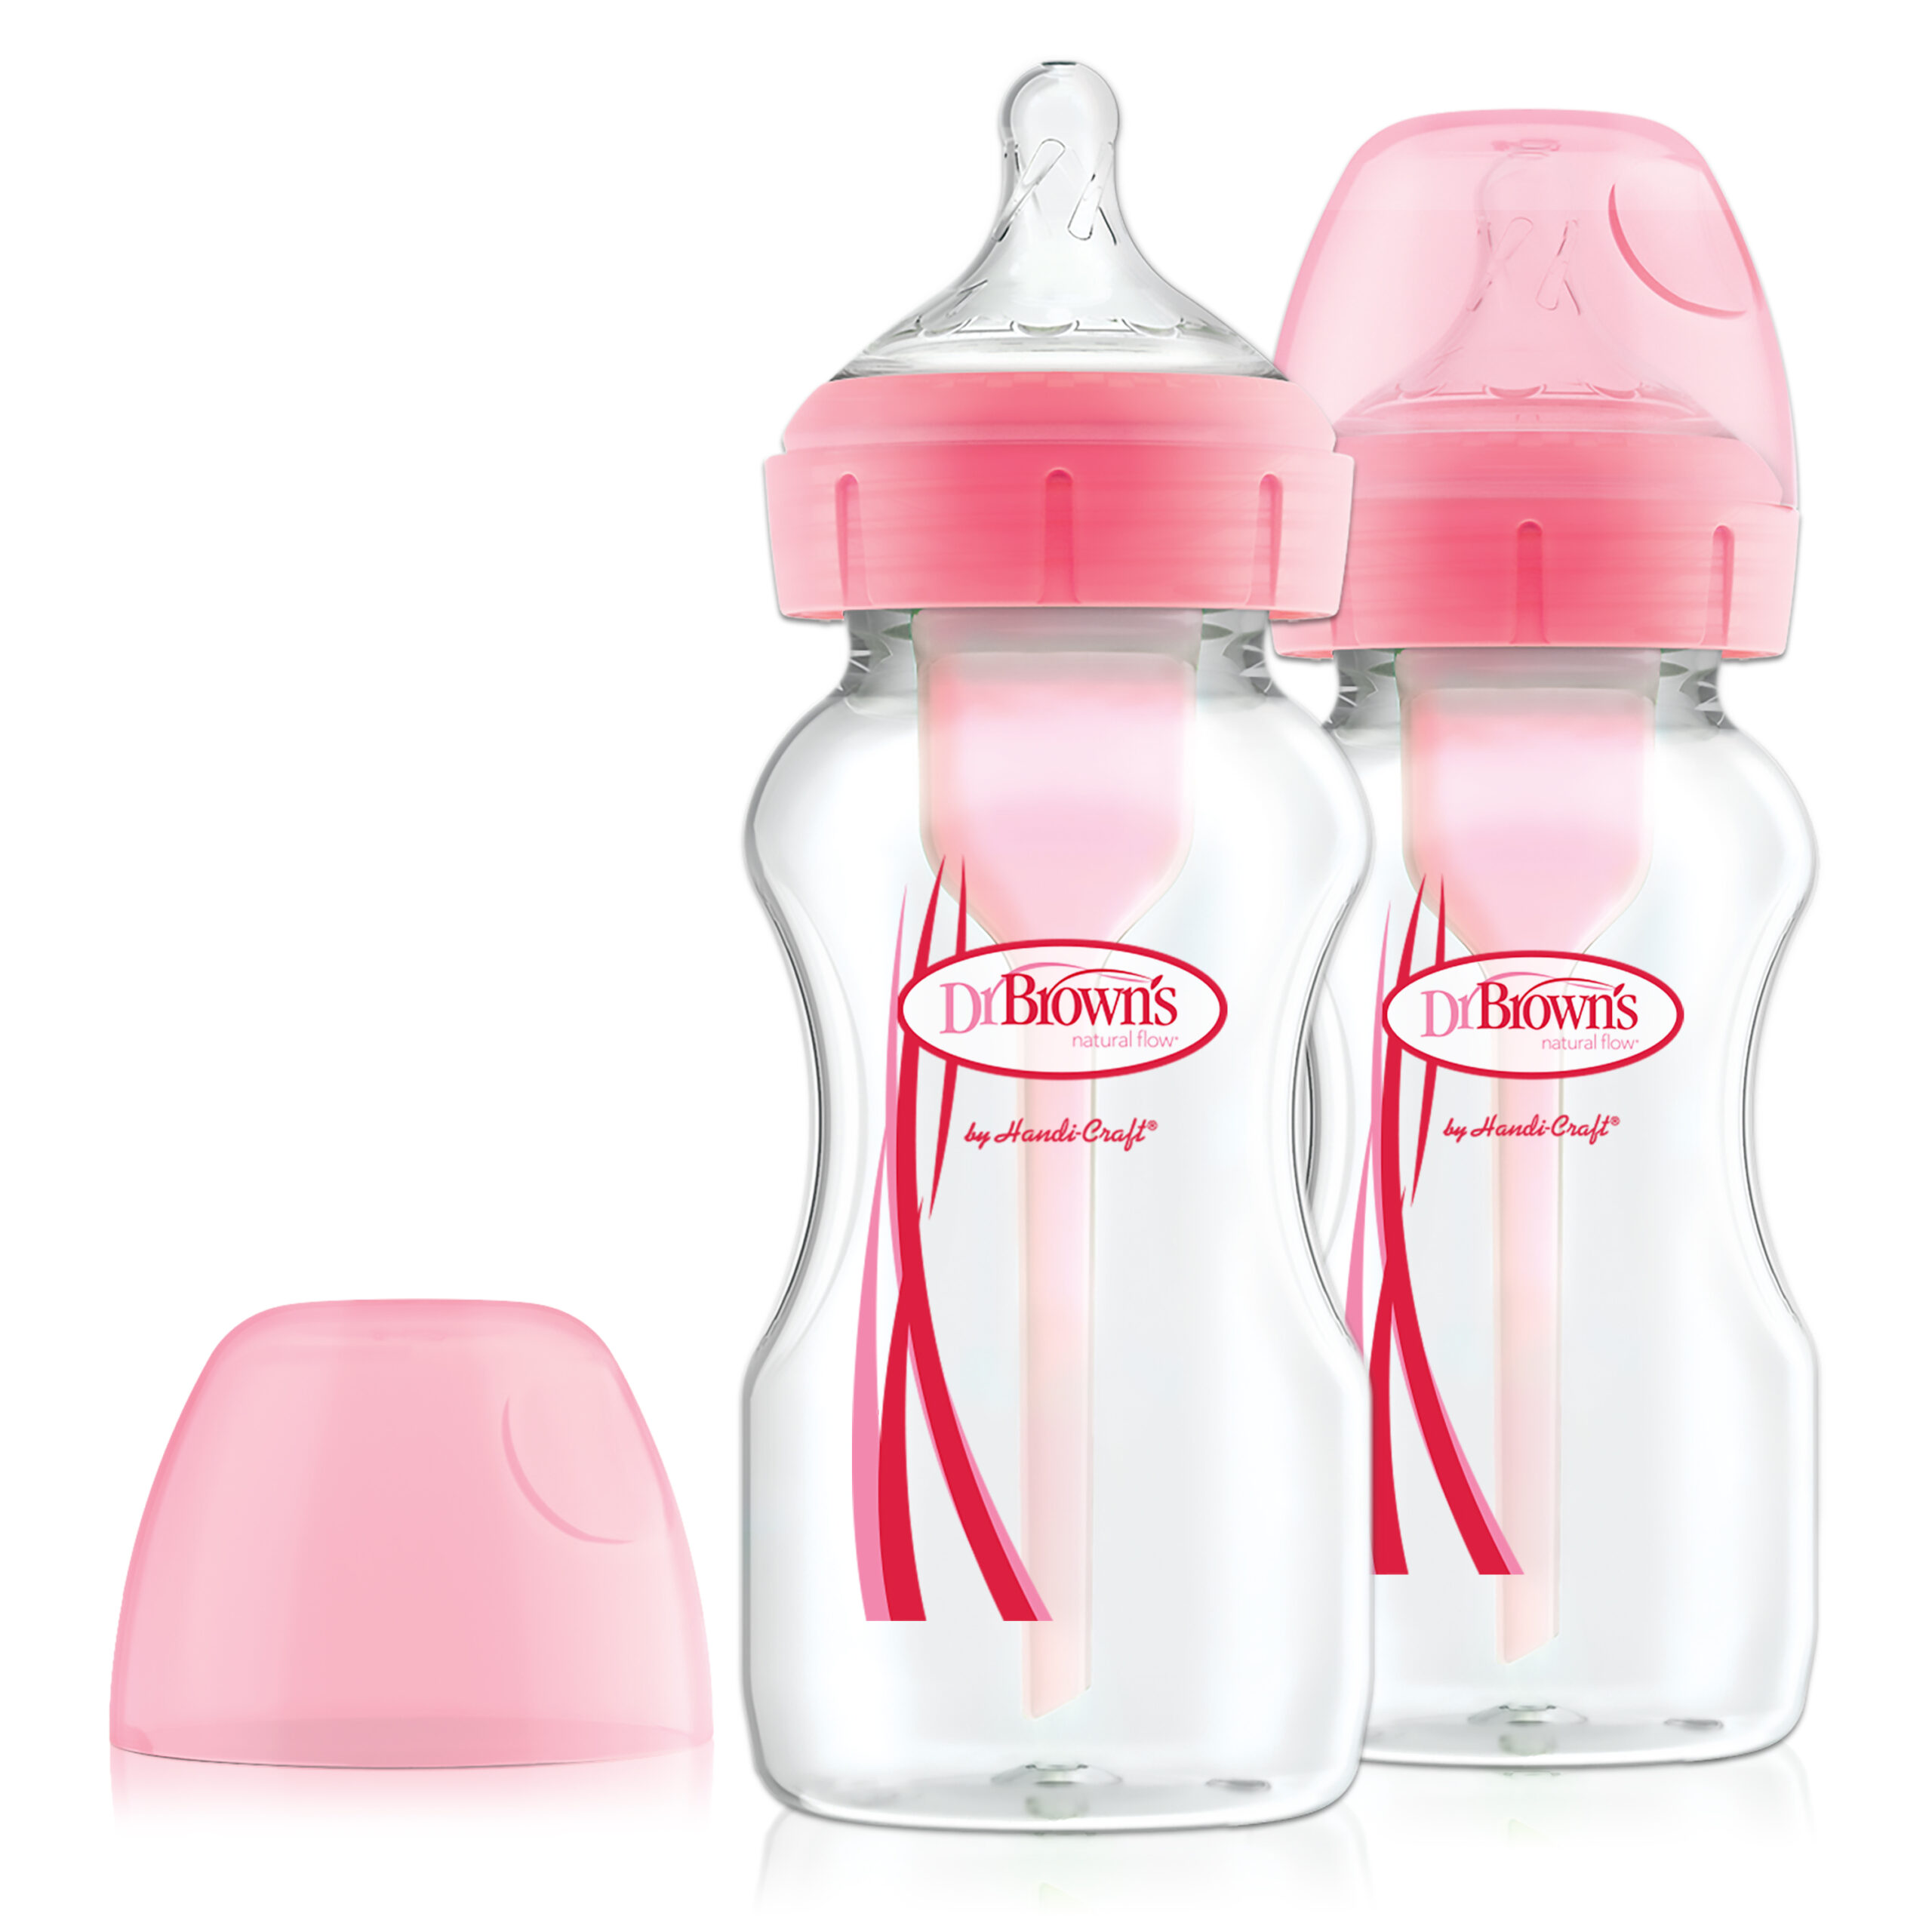 enthousiast Postbode zuiverheid Dr. Brown's Options+ Anti-colic Bottle 2-pack | Brede halsfles roze 270 ml  • Dr. Brown's